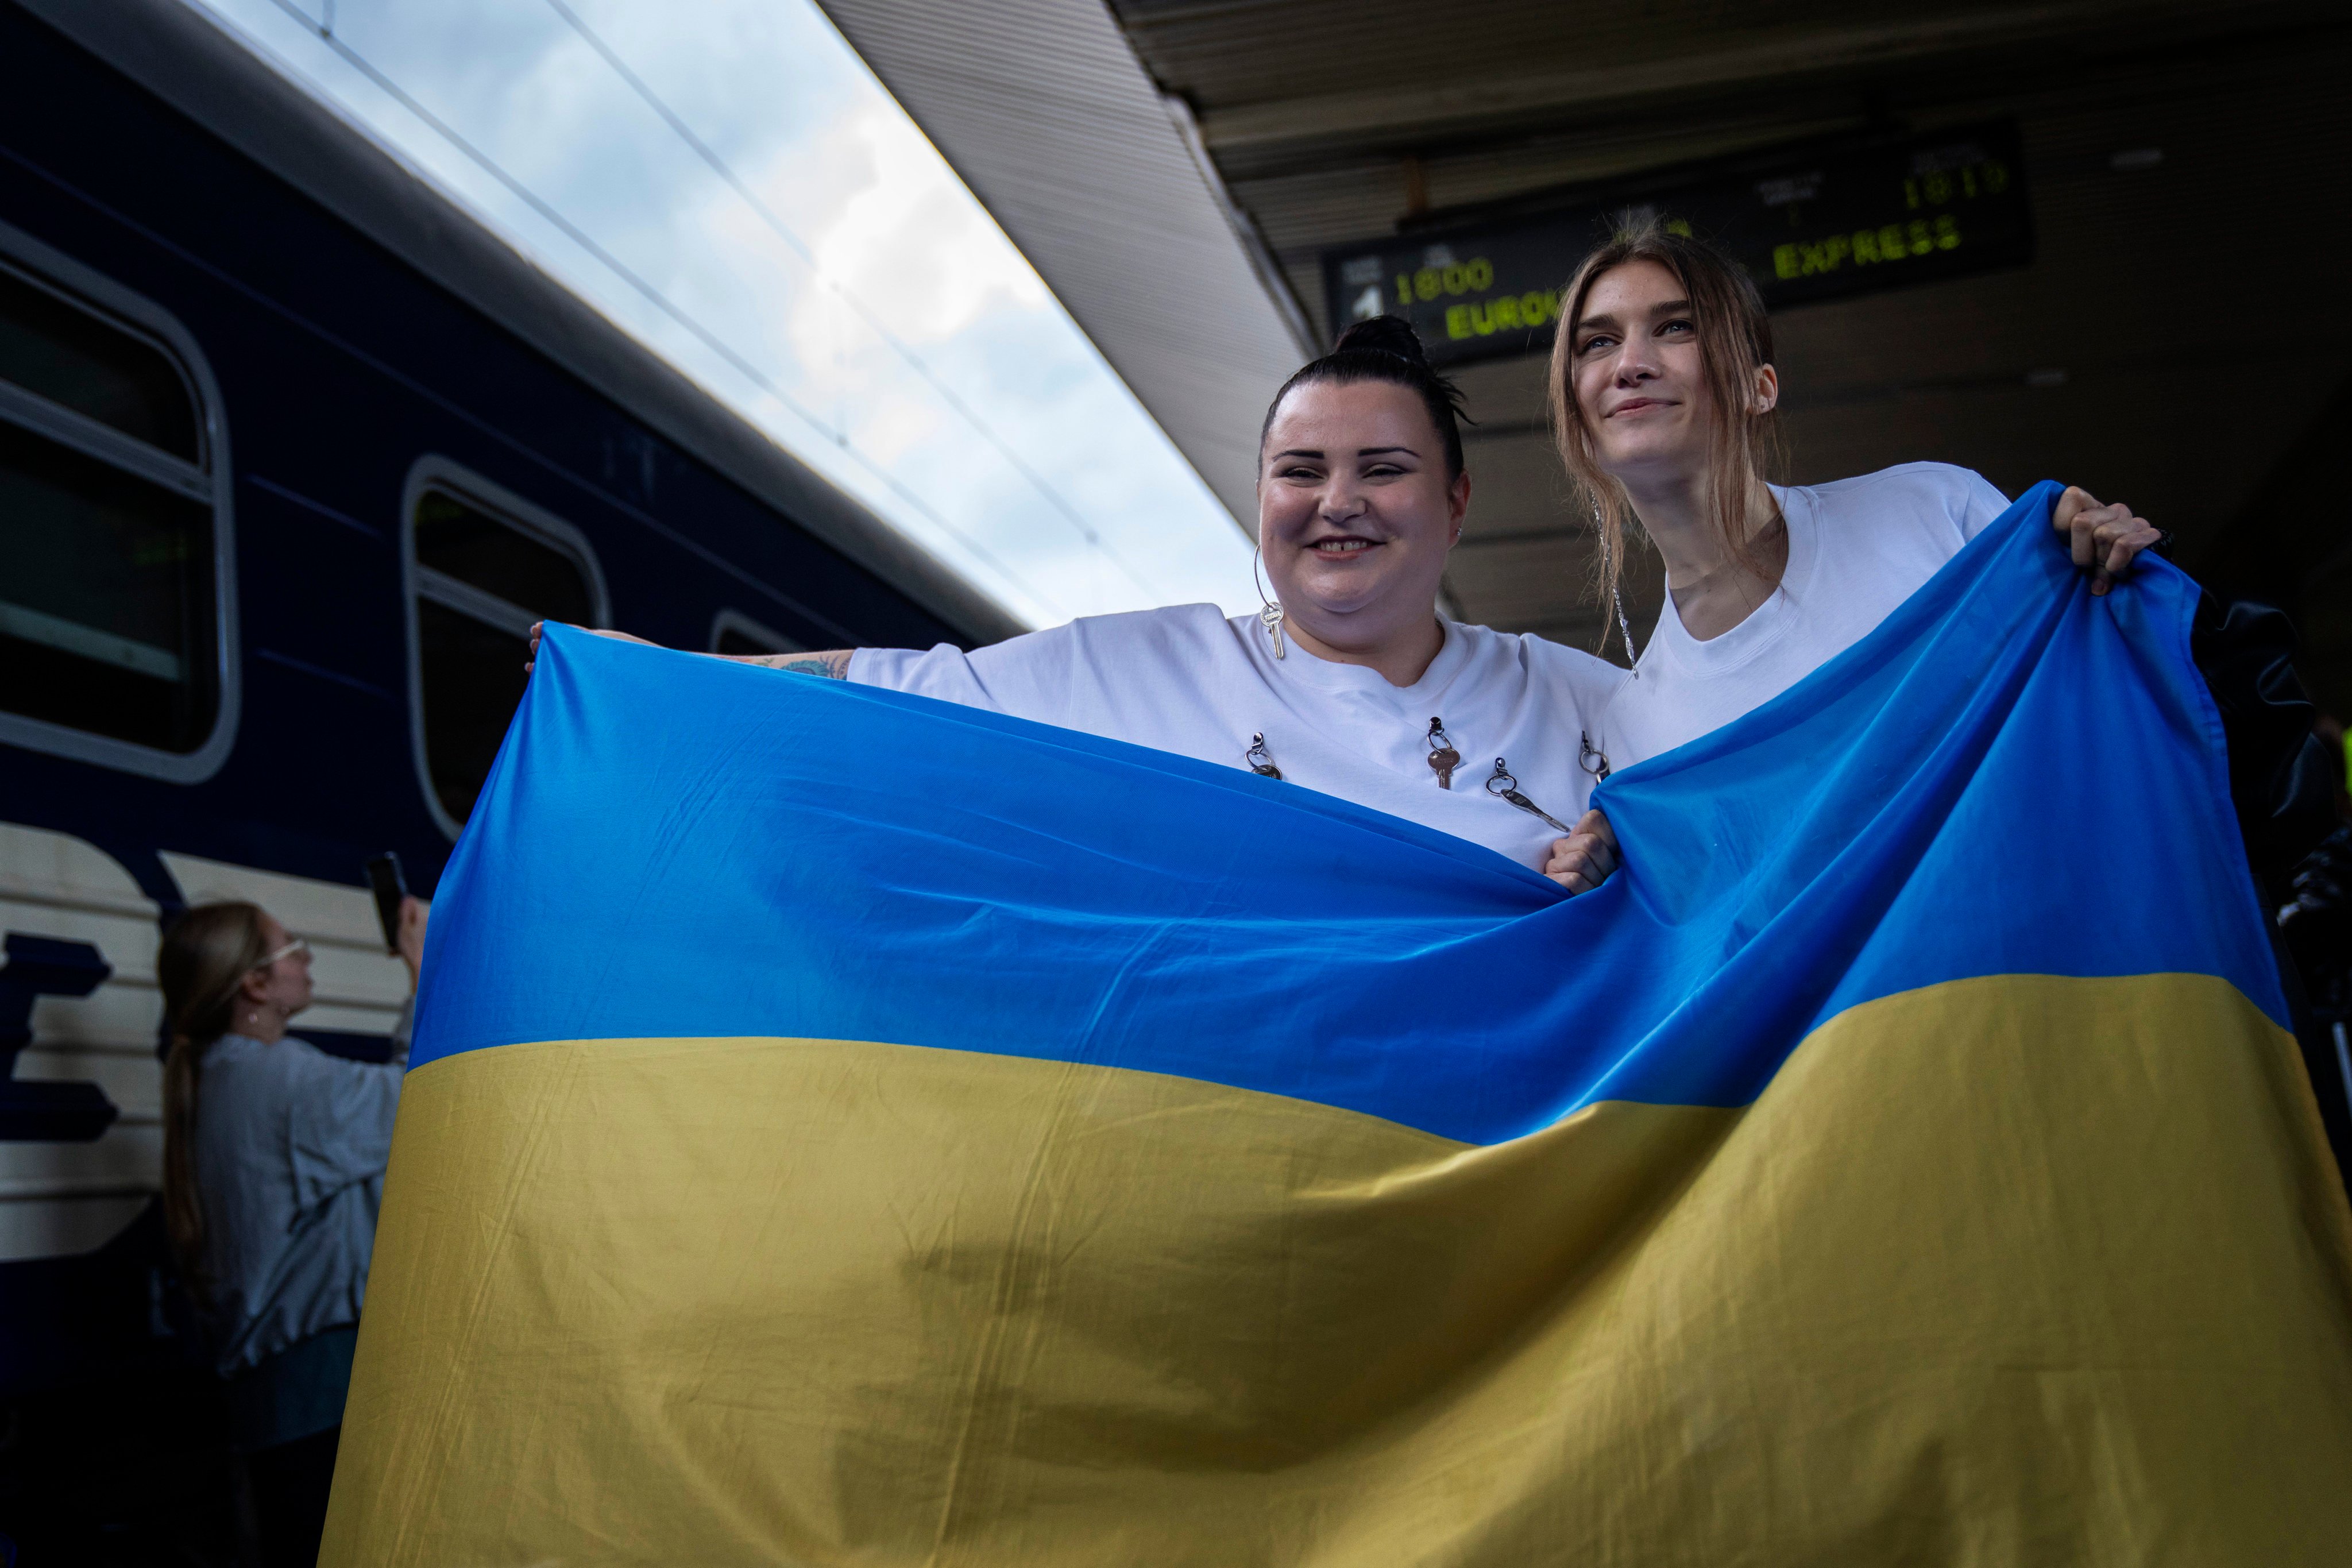 Ukrainian singer Jerry Heil and rapper alyona alyona promote their war-torn country’s music, culture and freedom as they set off to represent Ukraine at the Eurovision Song Contest. Photo: AP